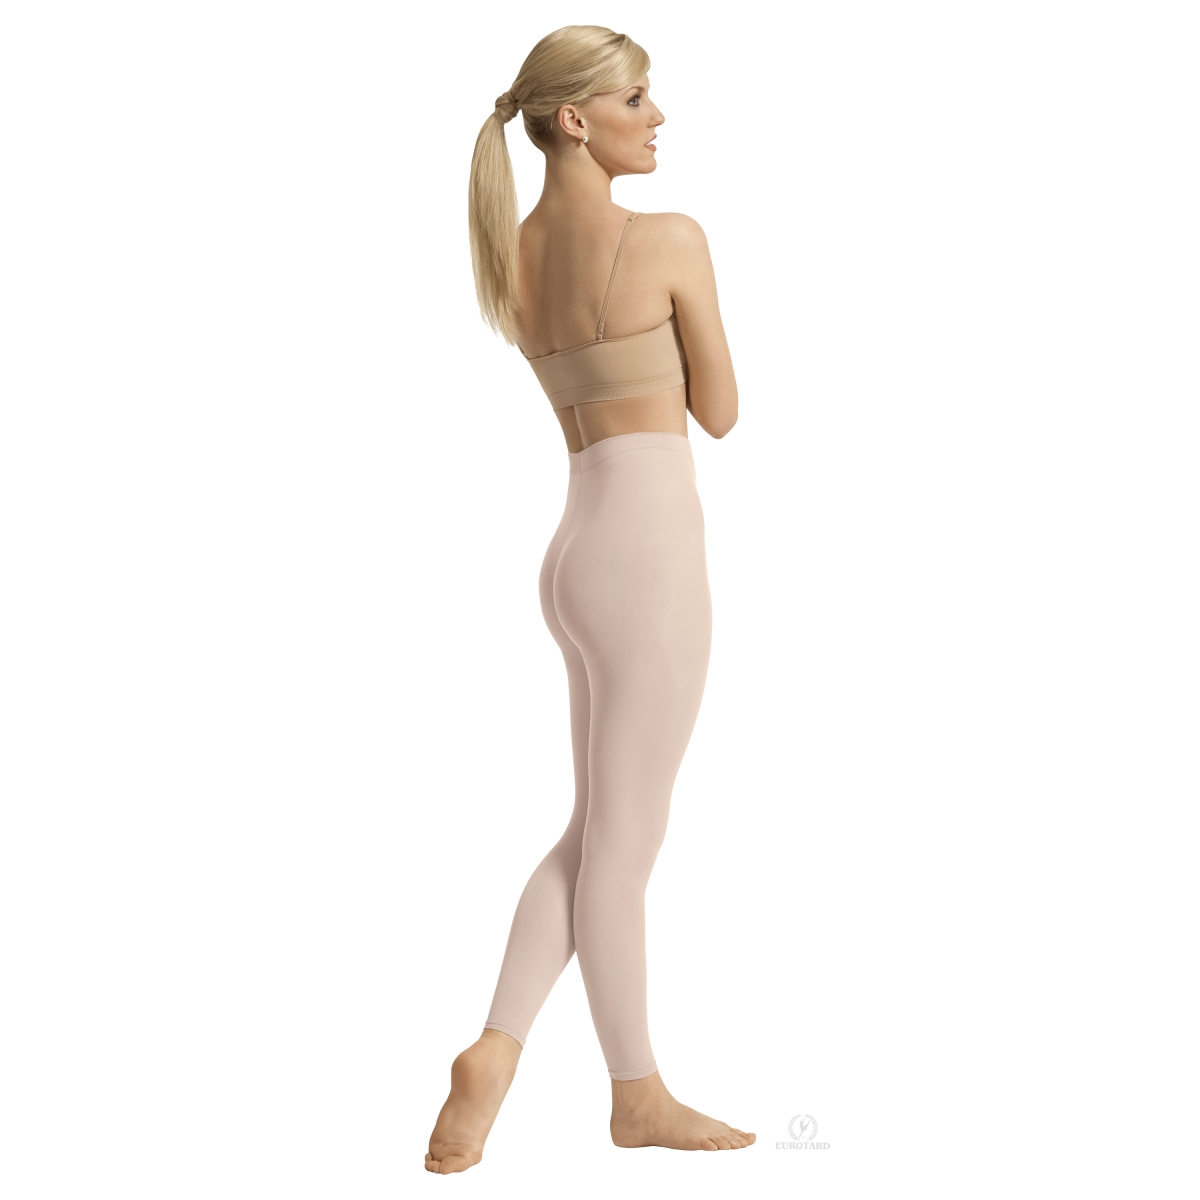 212-tp-xxl Intimates Adult Non-run Footless Tights, Theatrical Pink - 2xl